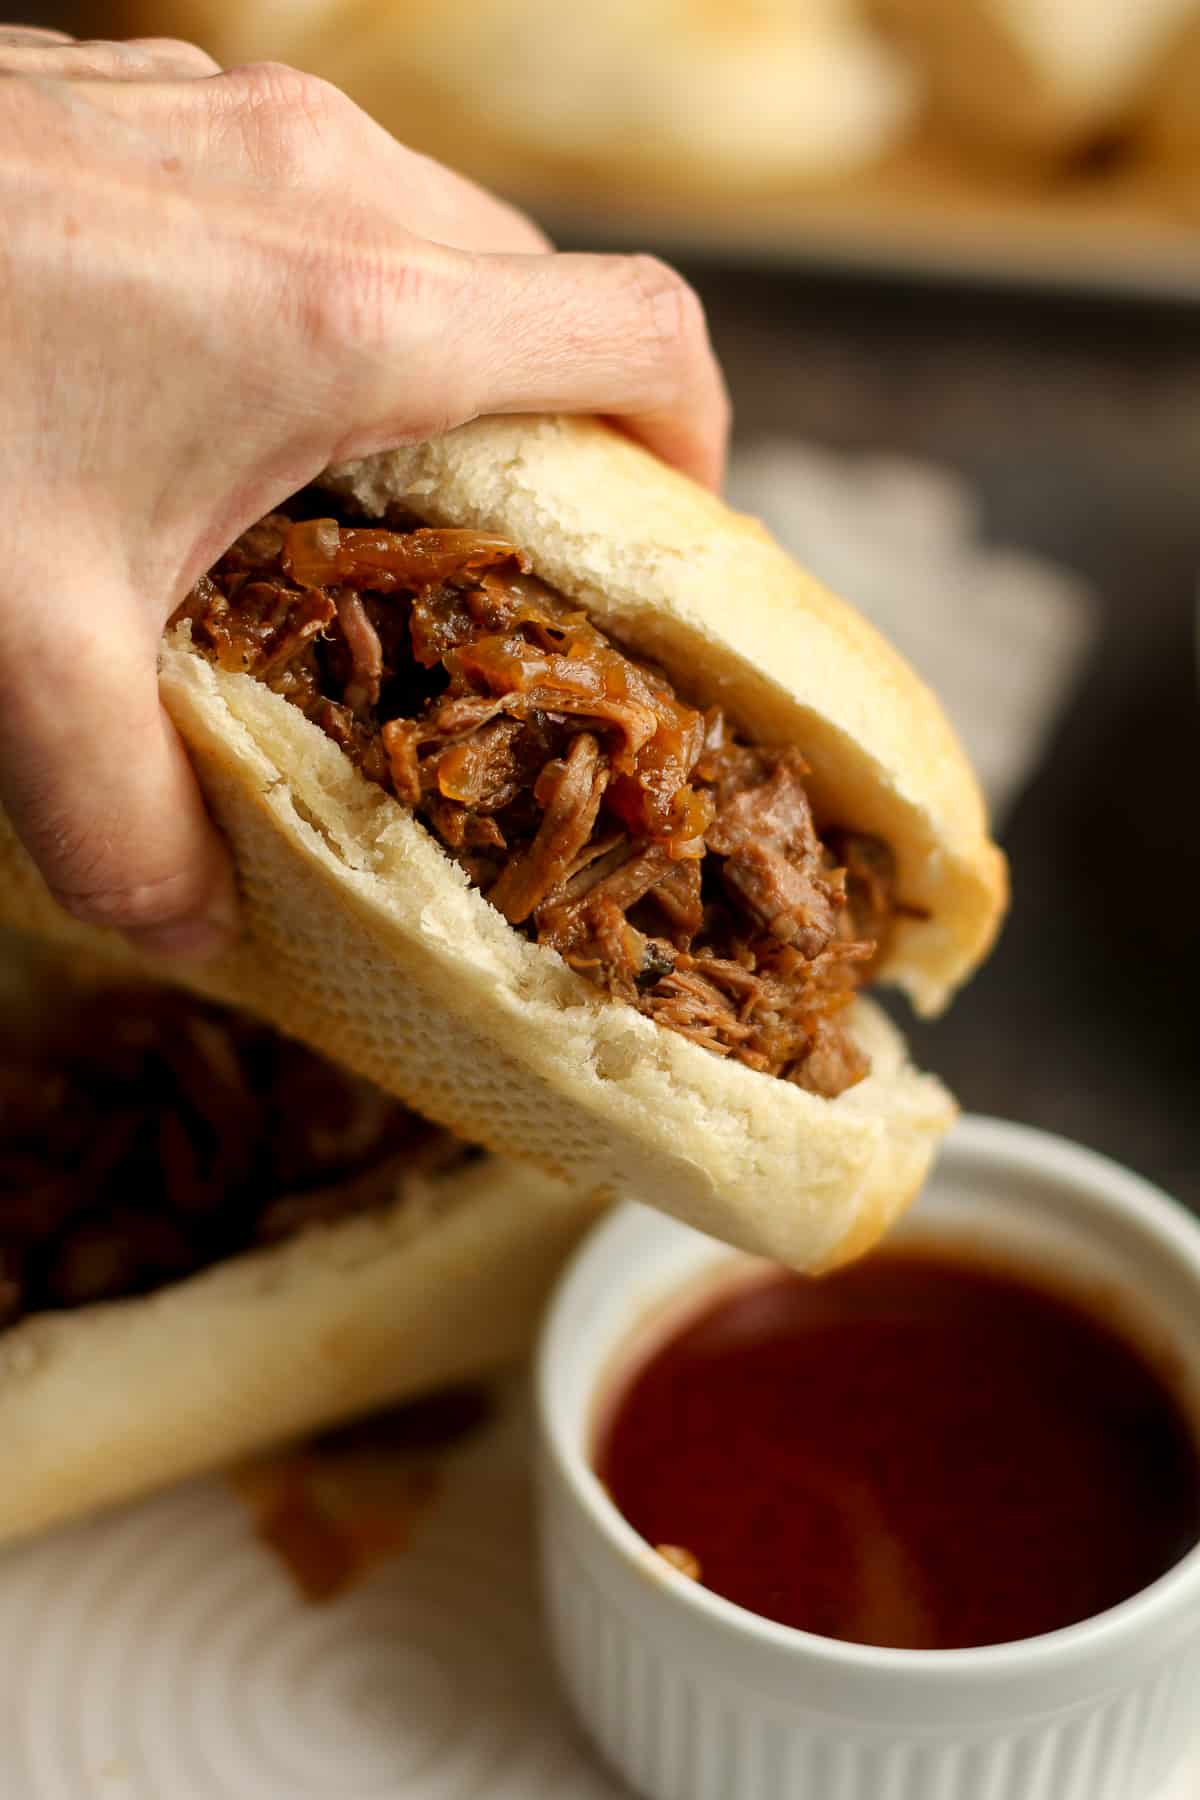 My hand dipping a beef sandwich into the au jus.